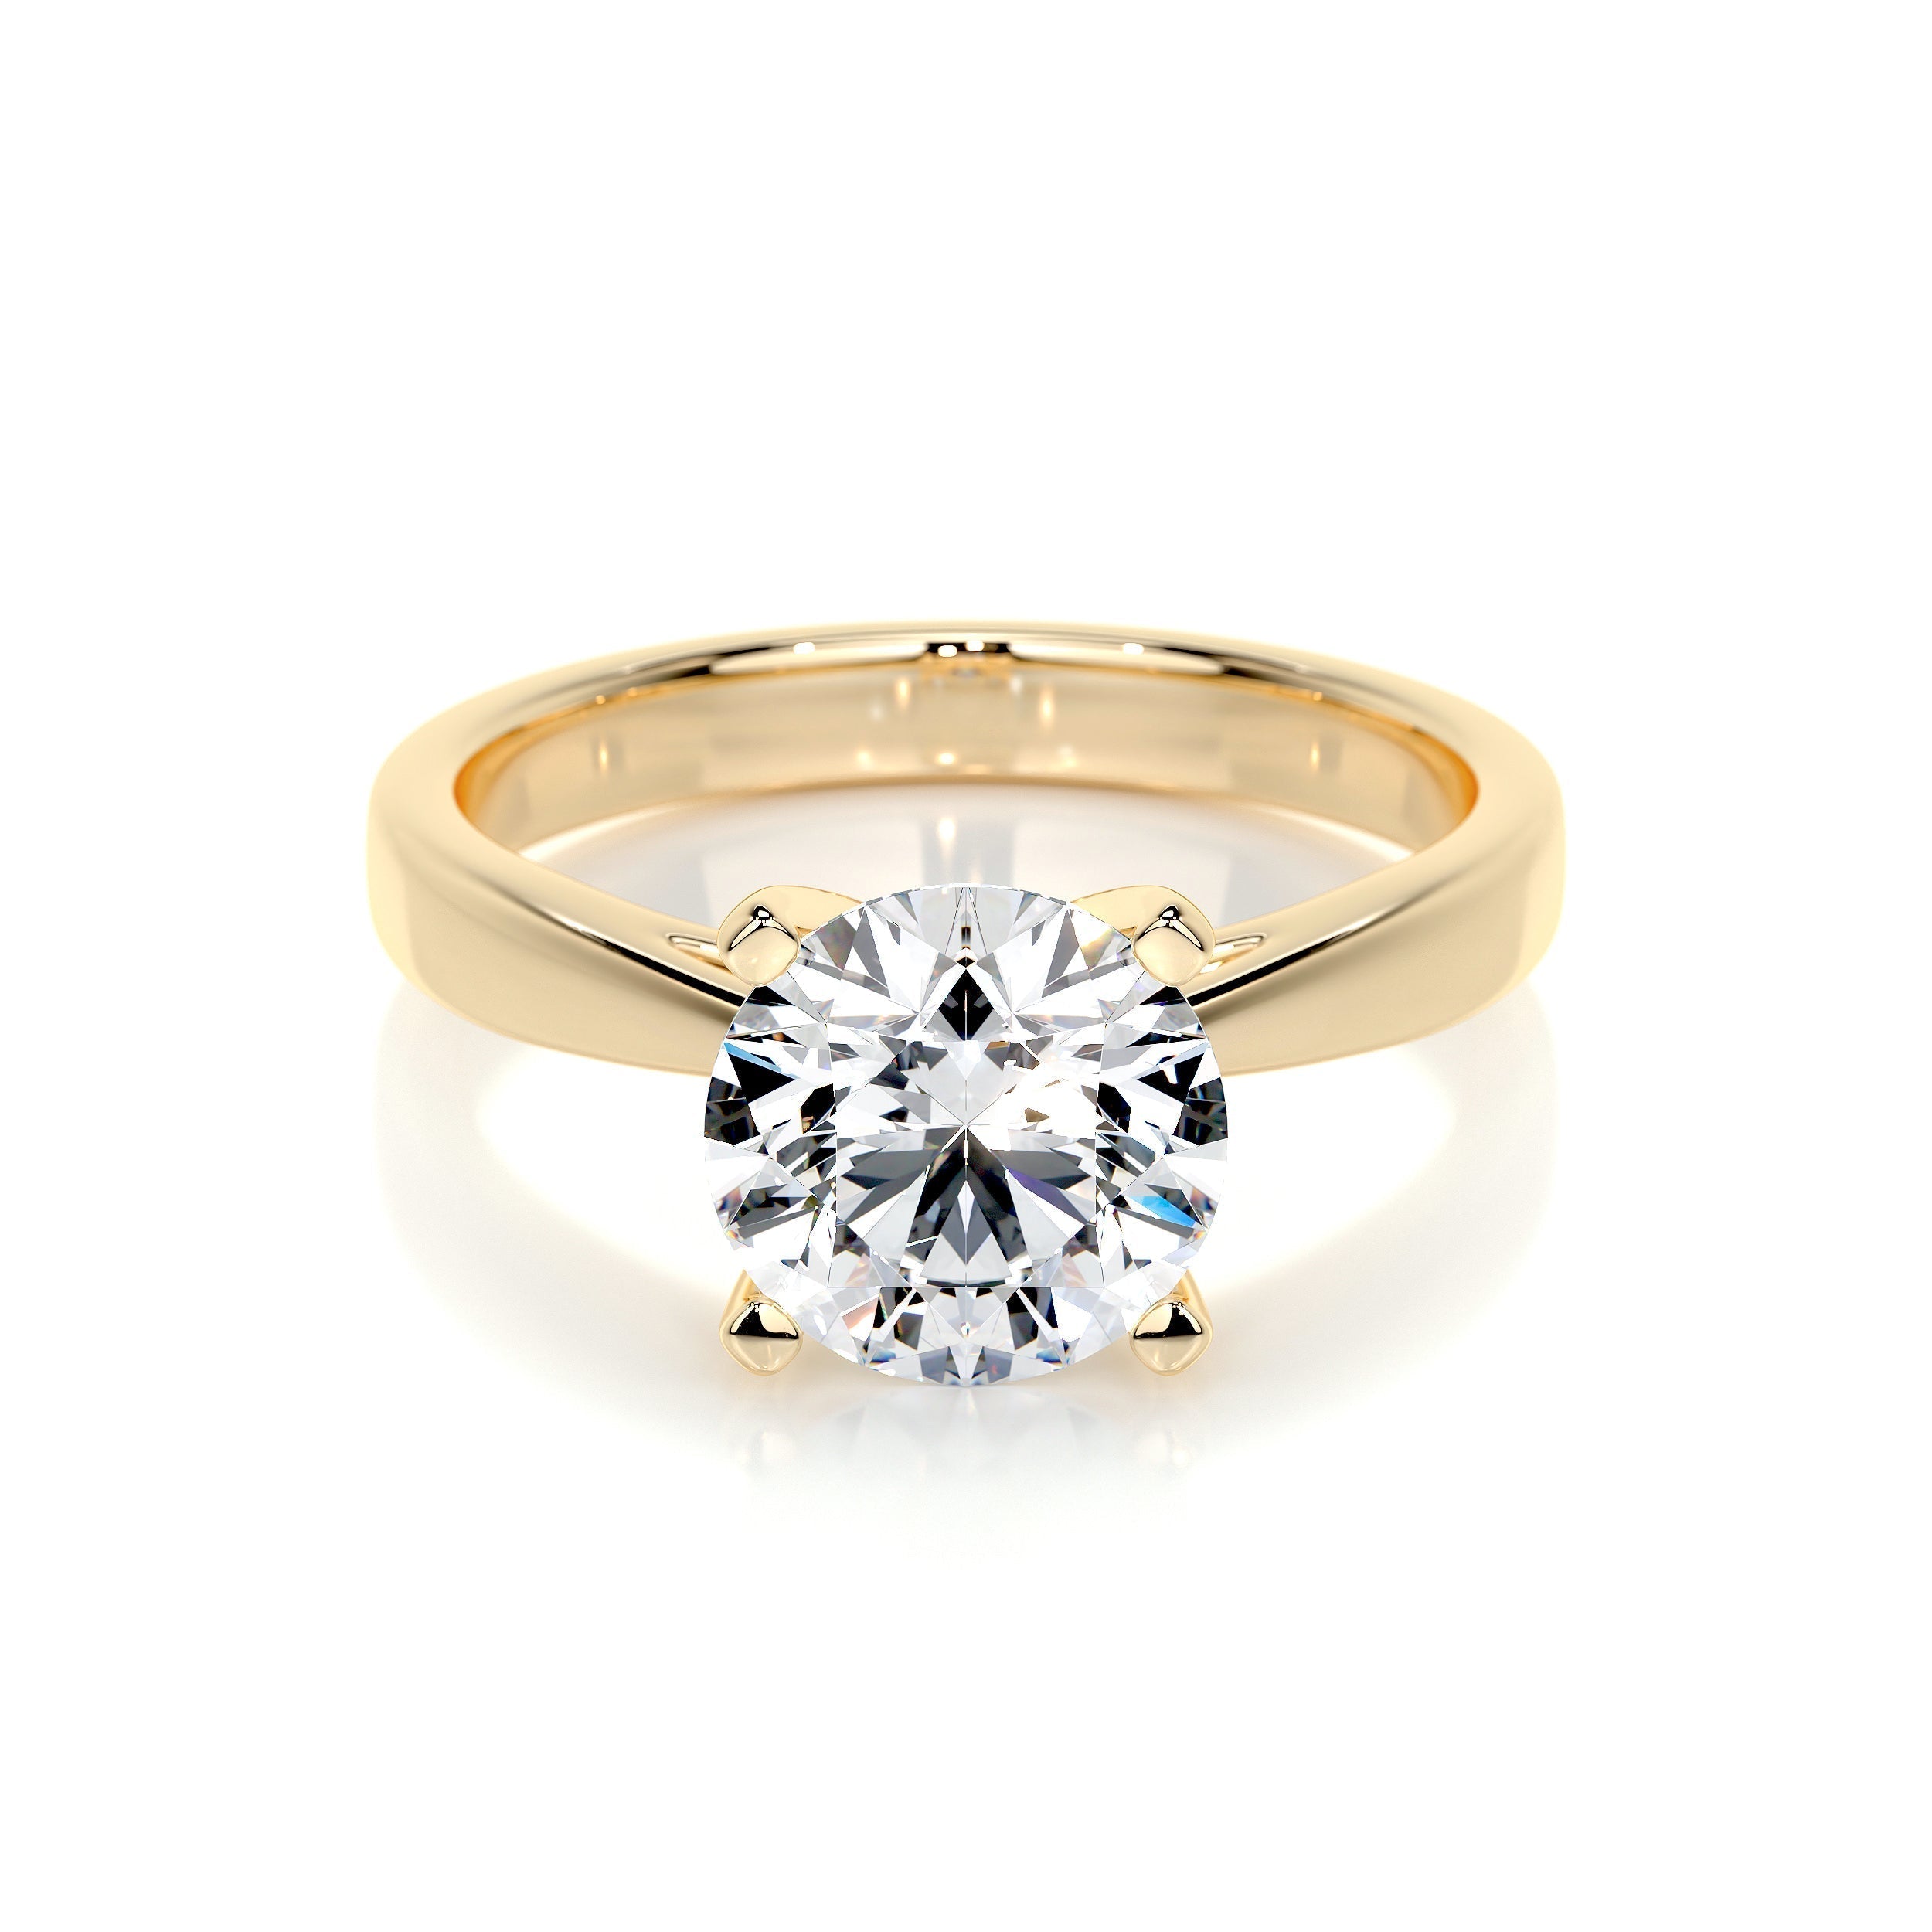 2.0 CT Round Solitaire CVD H/VS2 Diamond Engagement Ring 7